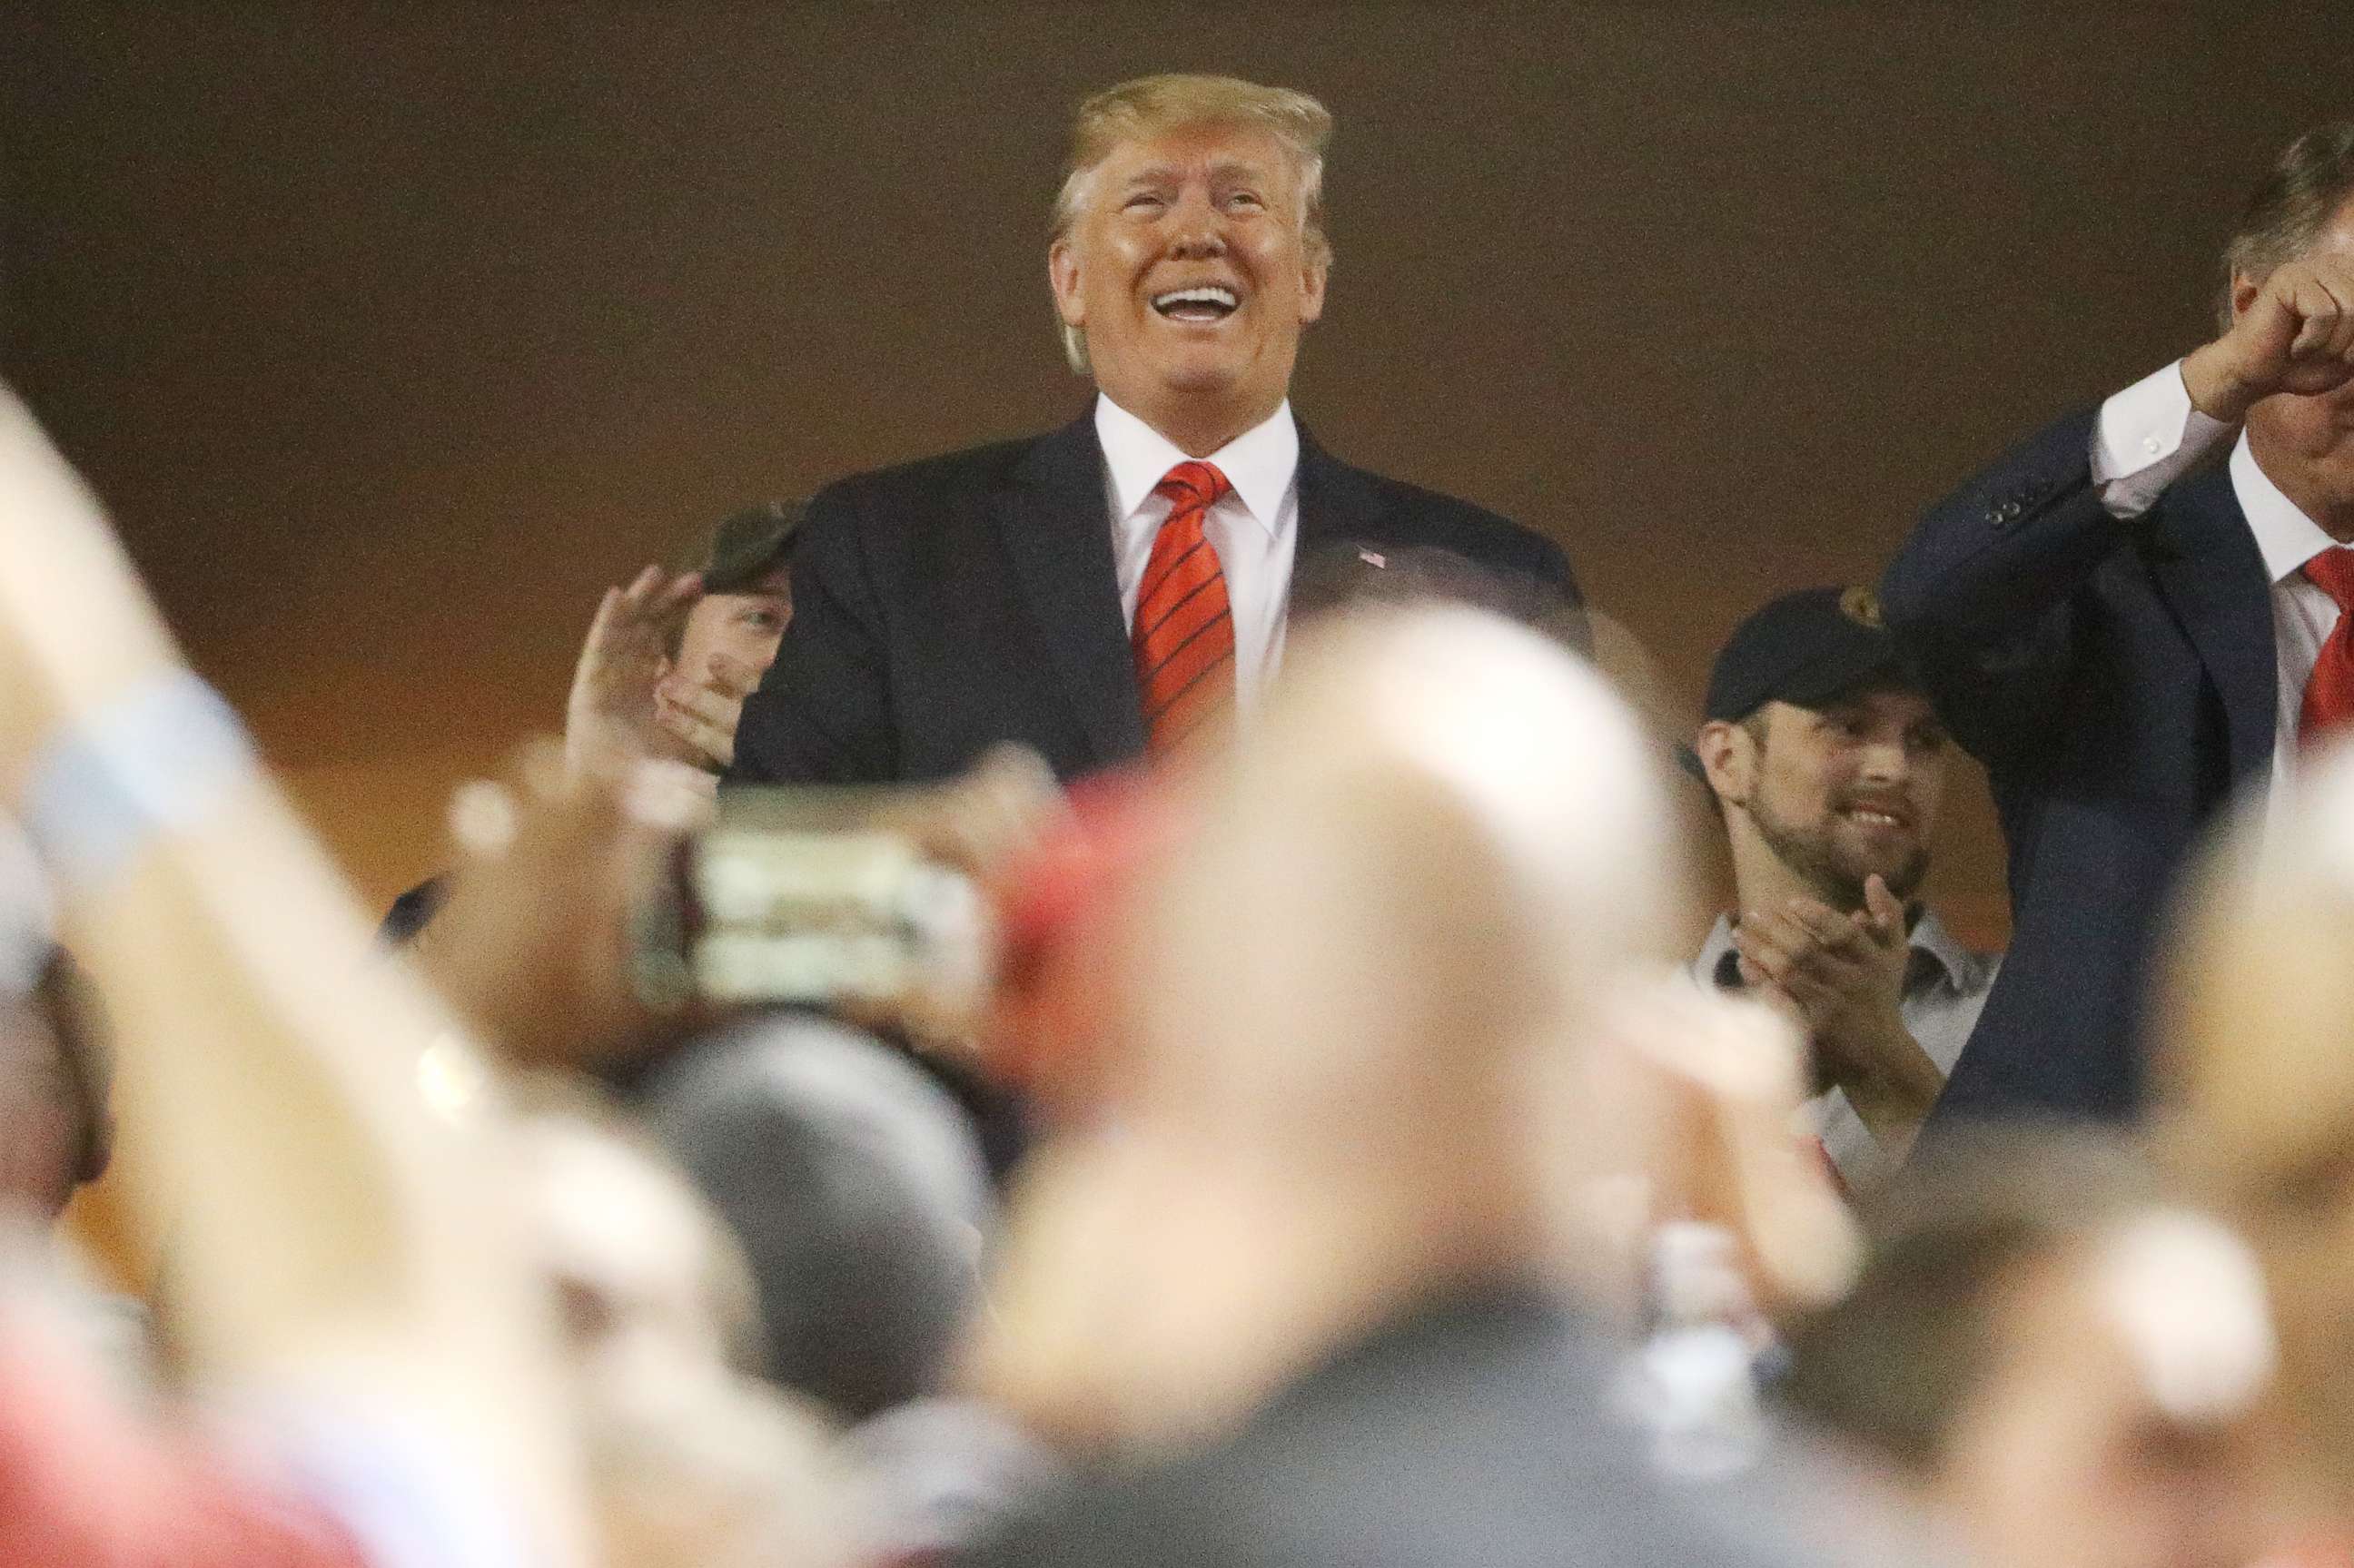 PHOTO: WASHINGTON, DC - OCTOBER 27:  President Donald Trump attends Game Five of the 2019 World Series between the Houston Astros and the Washington Nationals at Nationals Park on October 27, 2019 in Washington, DC. (Photo by Patrick Smith/Getty Images)